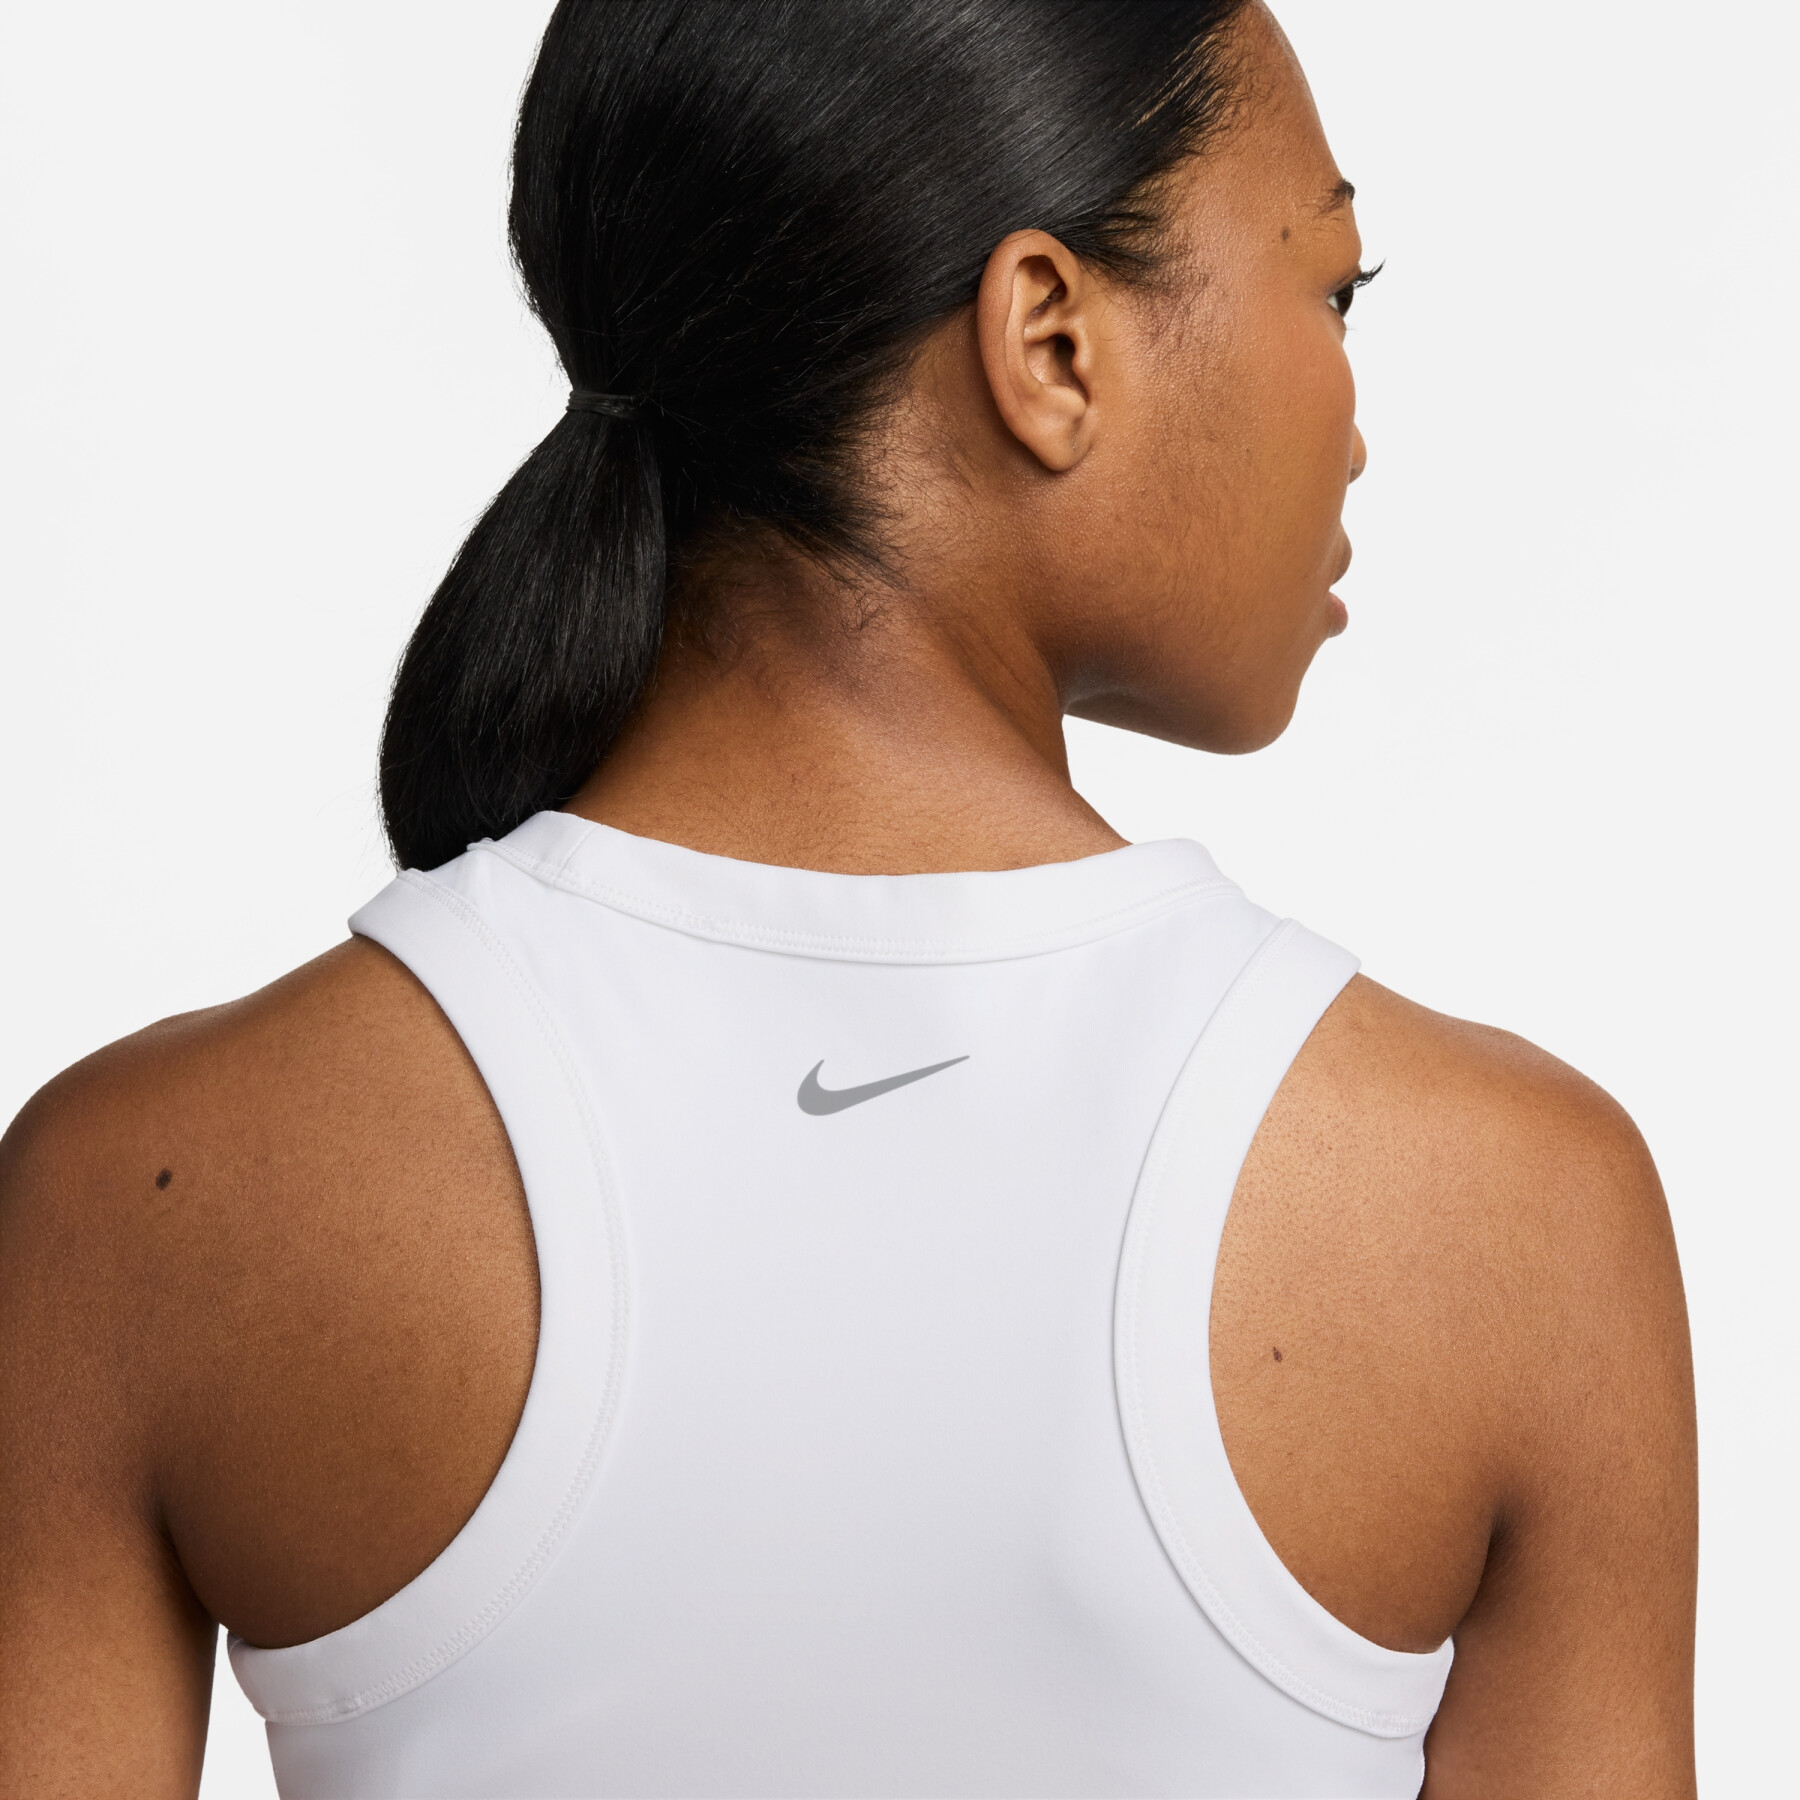 Women's tank top Nike One Fitted